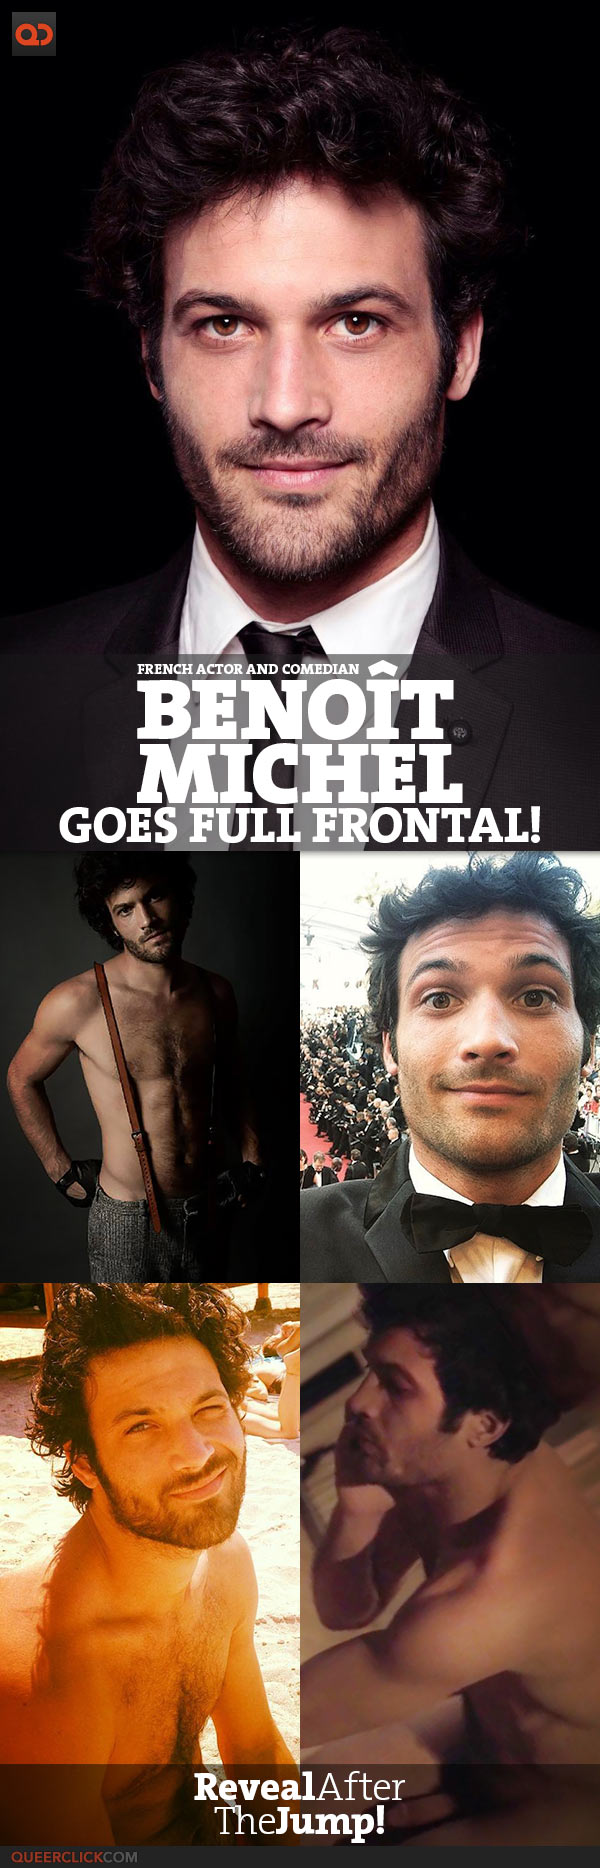 qc-exposed_celebs_french_actor_and_comedian_benoit_michel_full_frontal-teaser